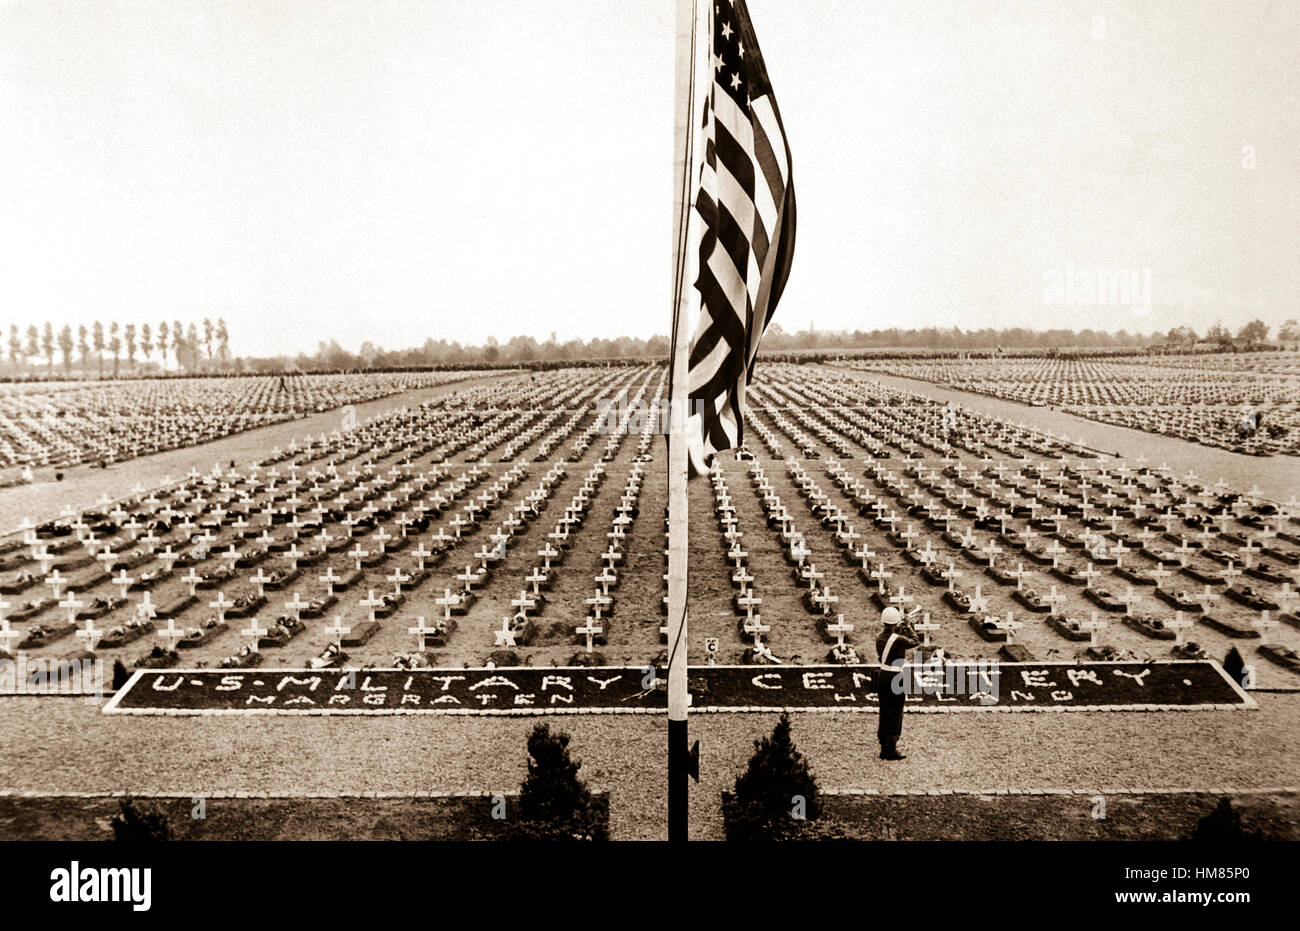 A bugler blow taps at the close of Memorial Day service at Margraten Cemetery, Holland, where lie thousands of American heroes of World War II.  May 30, 1945.  Pfc. Richard G. Thompson.  (Army) NARA FILE #:  111-SC-207902 WAR & CONFLICT BOOK #:  1348 Stock Photo